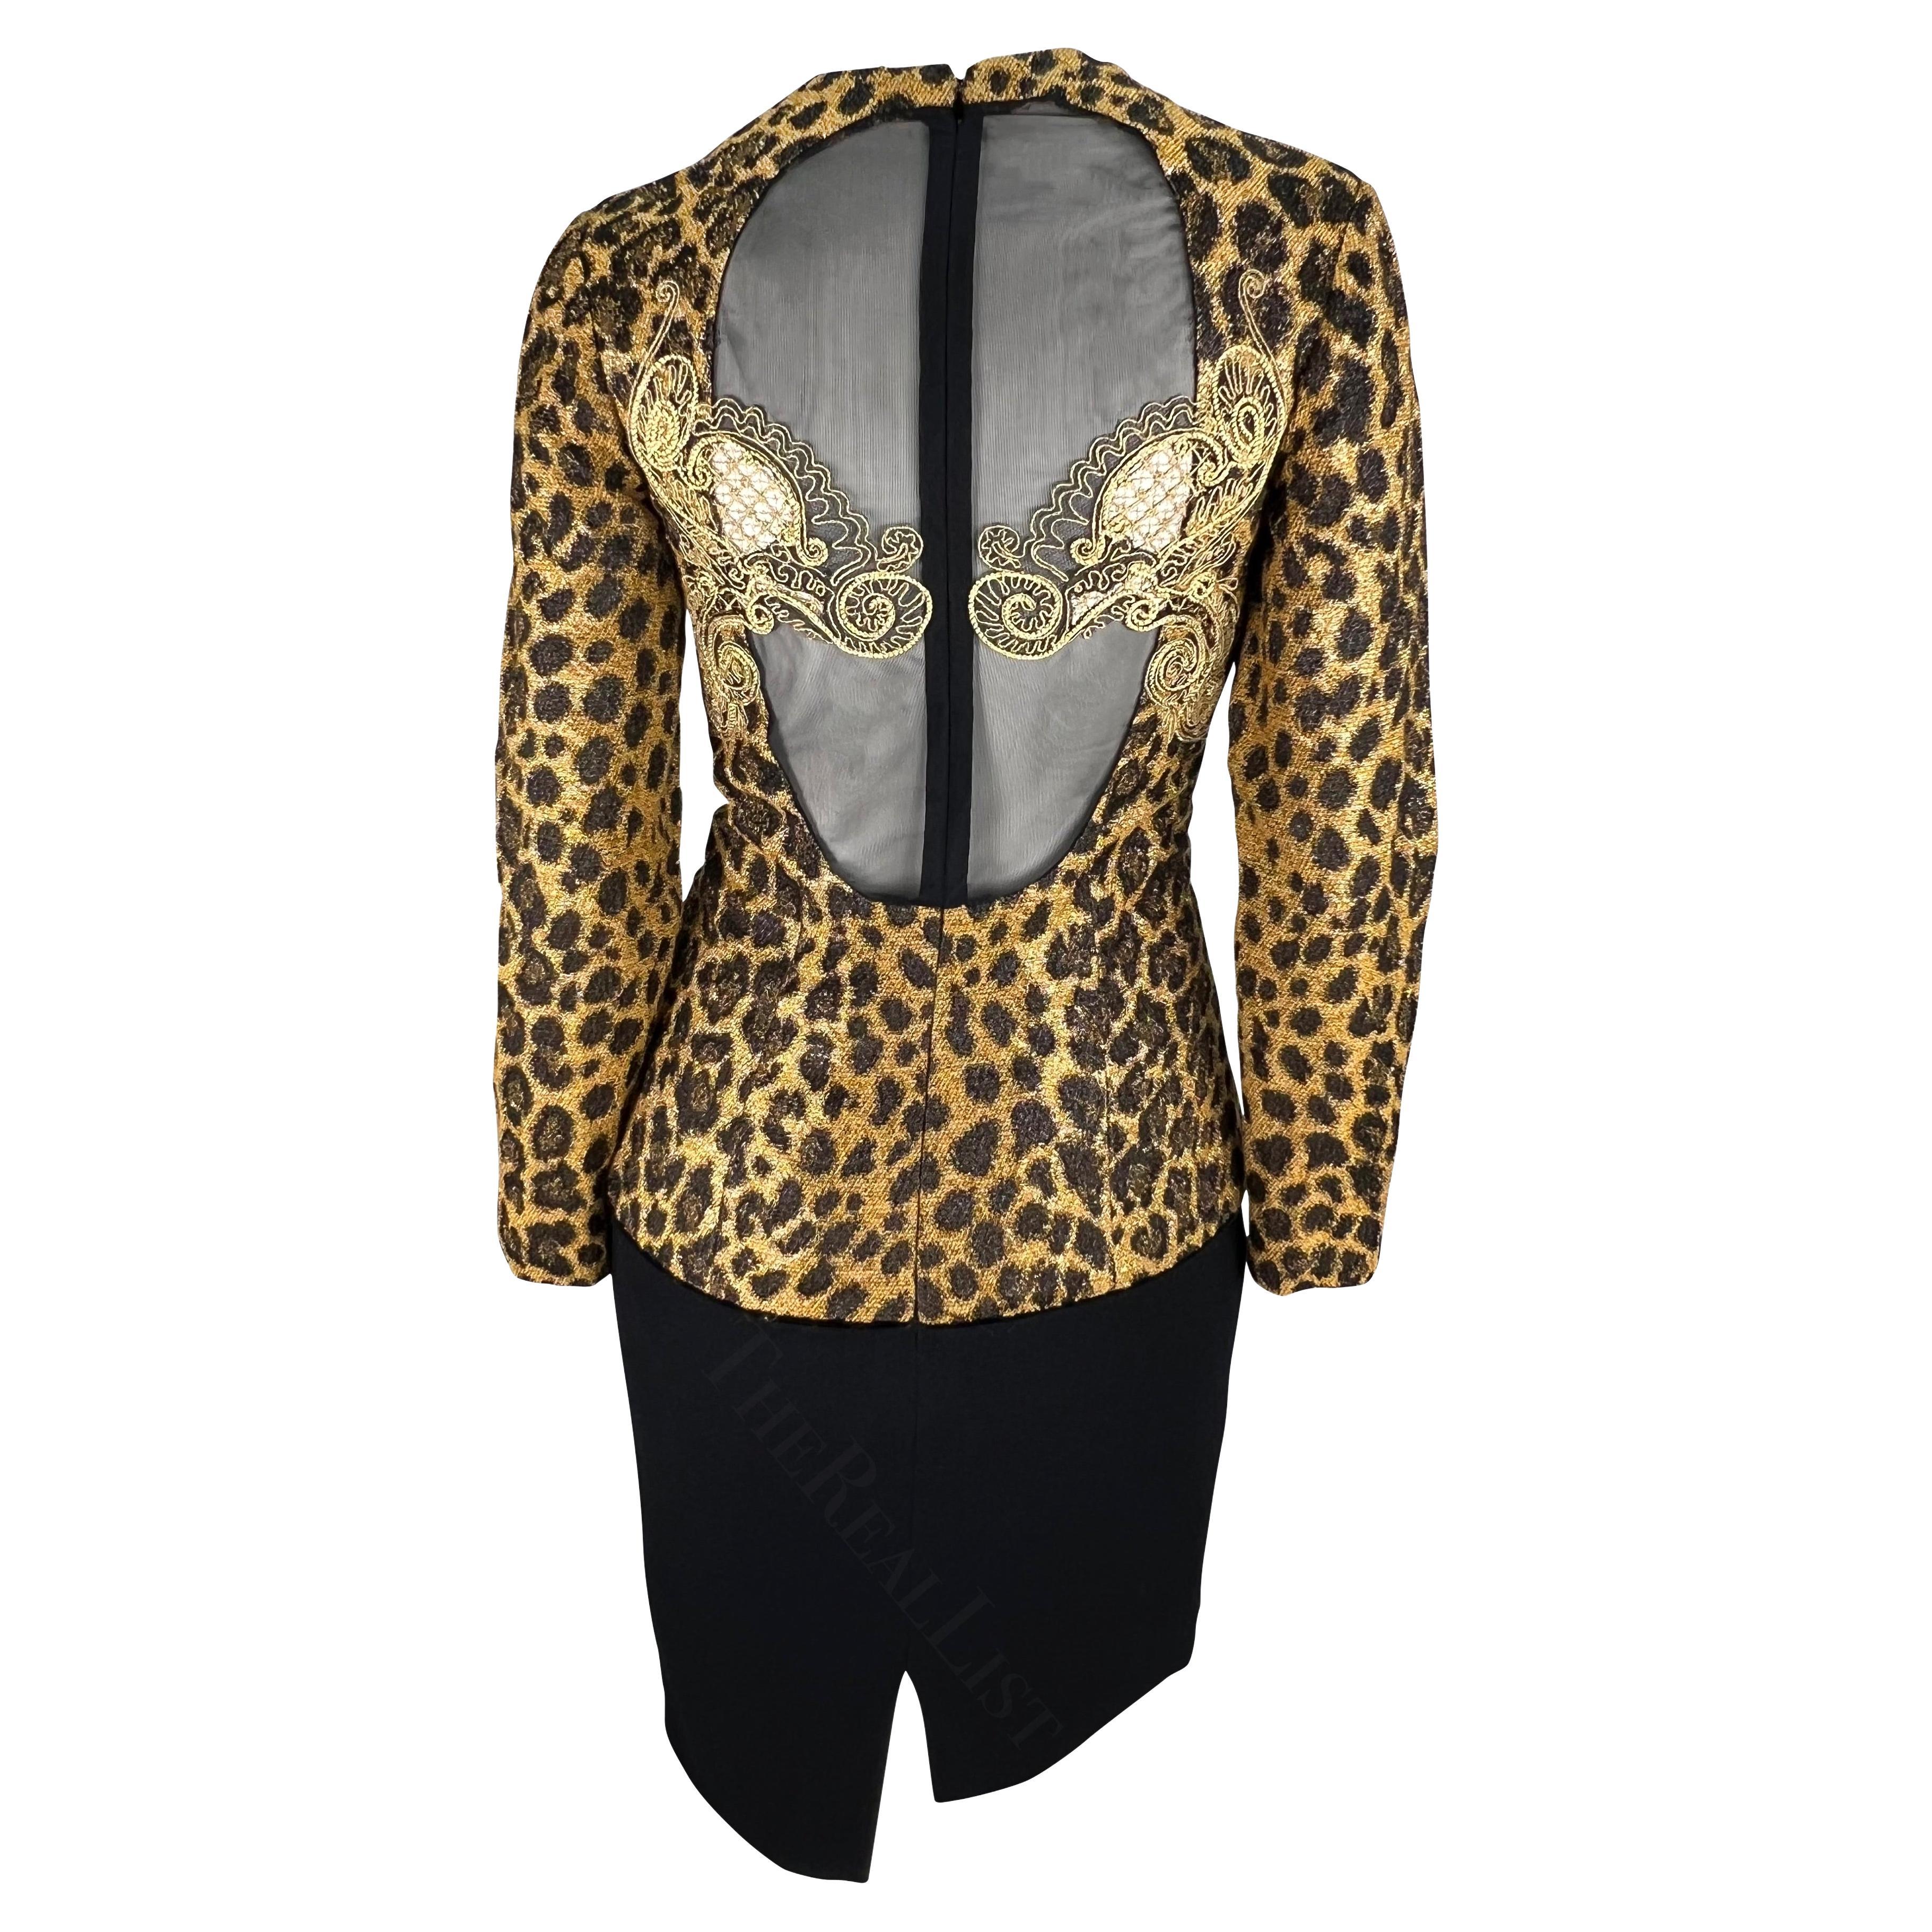 Early 1990s Christian Dior by Gianfranco Ferre Cheetah Print Embroidered Dress For Sale